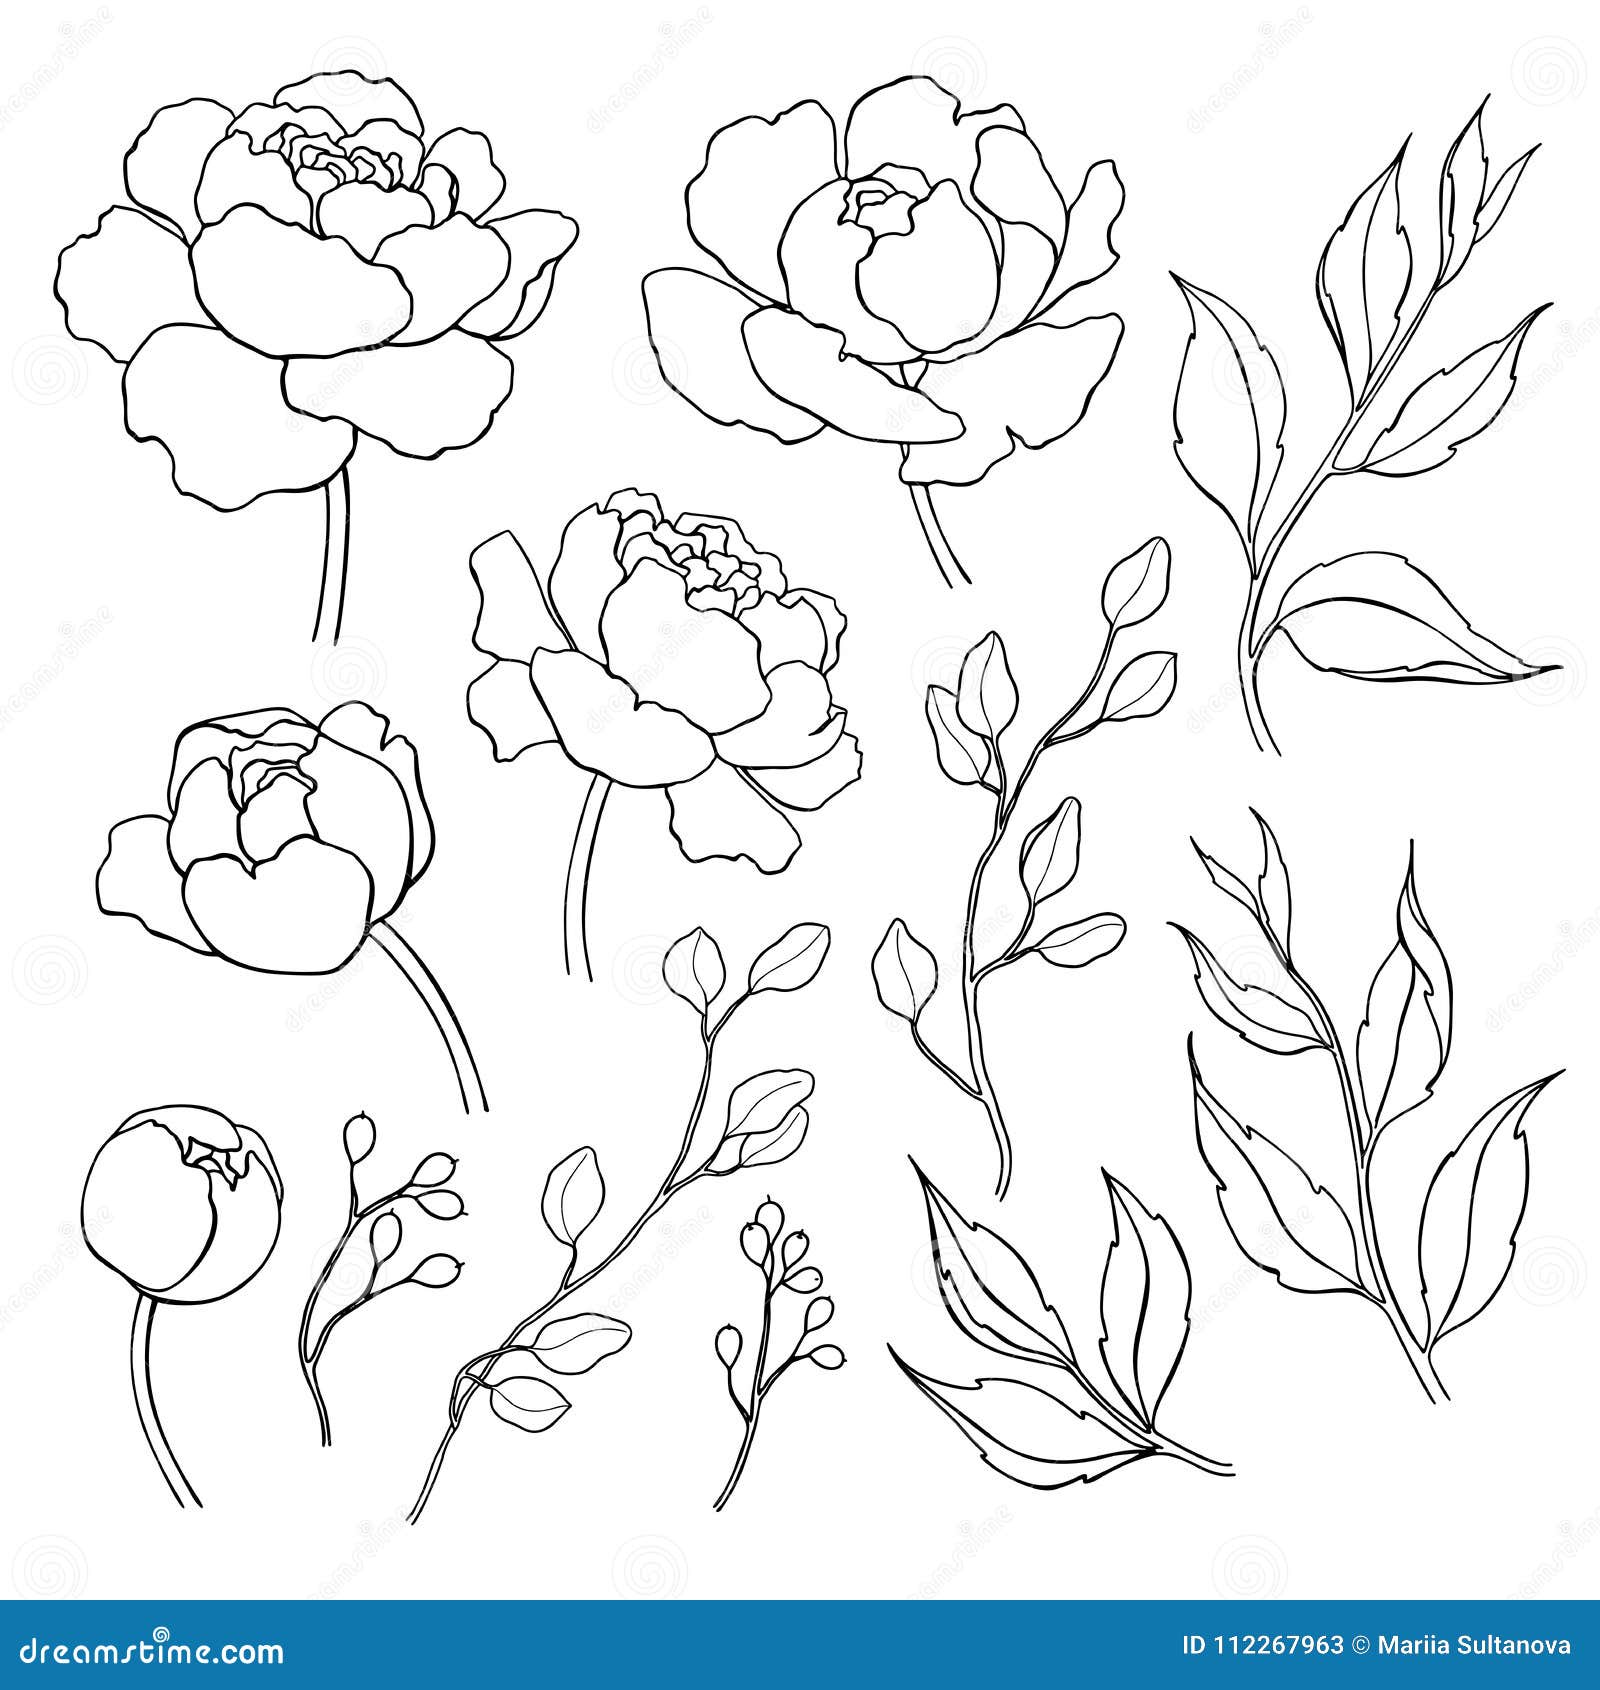 How to Draw a Field of Flowers - Easy Drawing Art